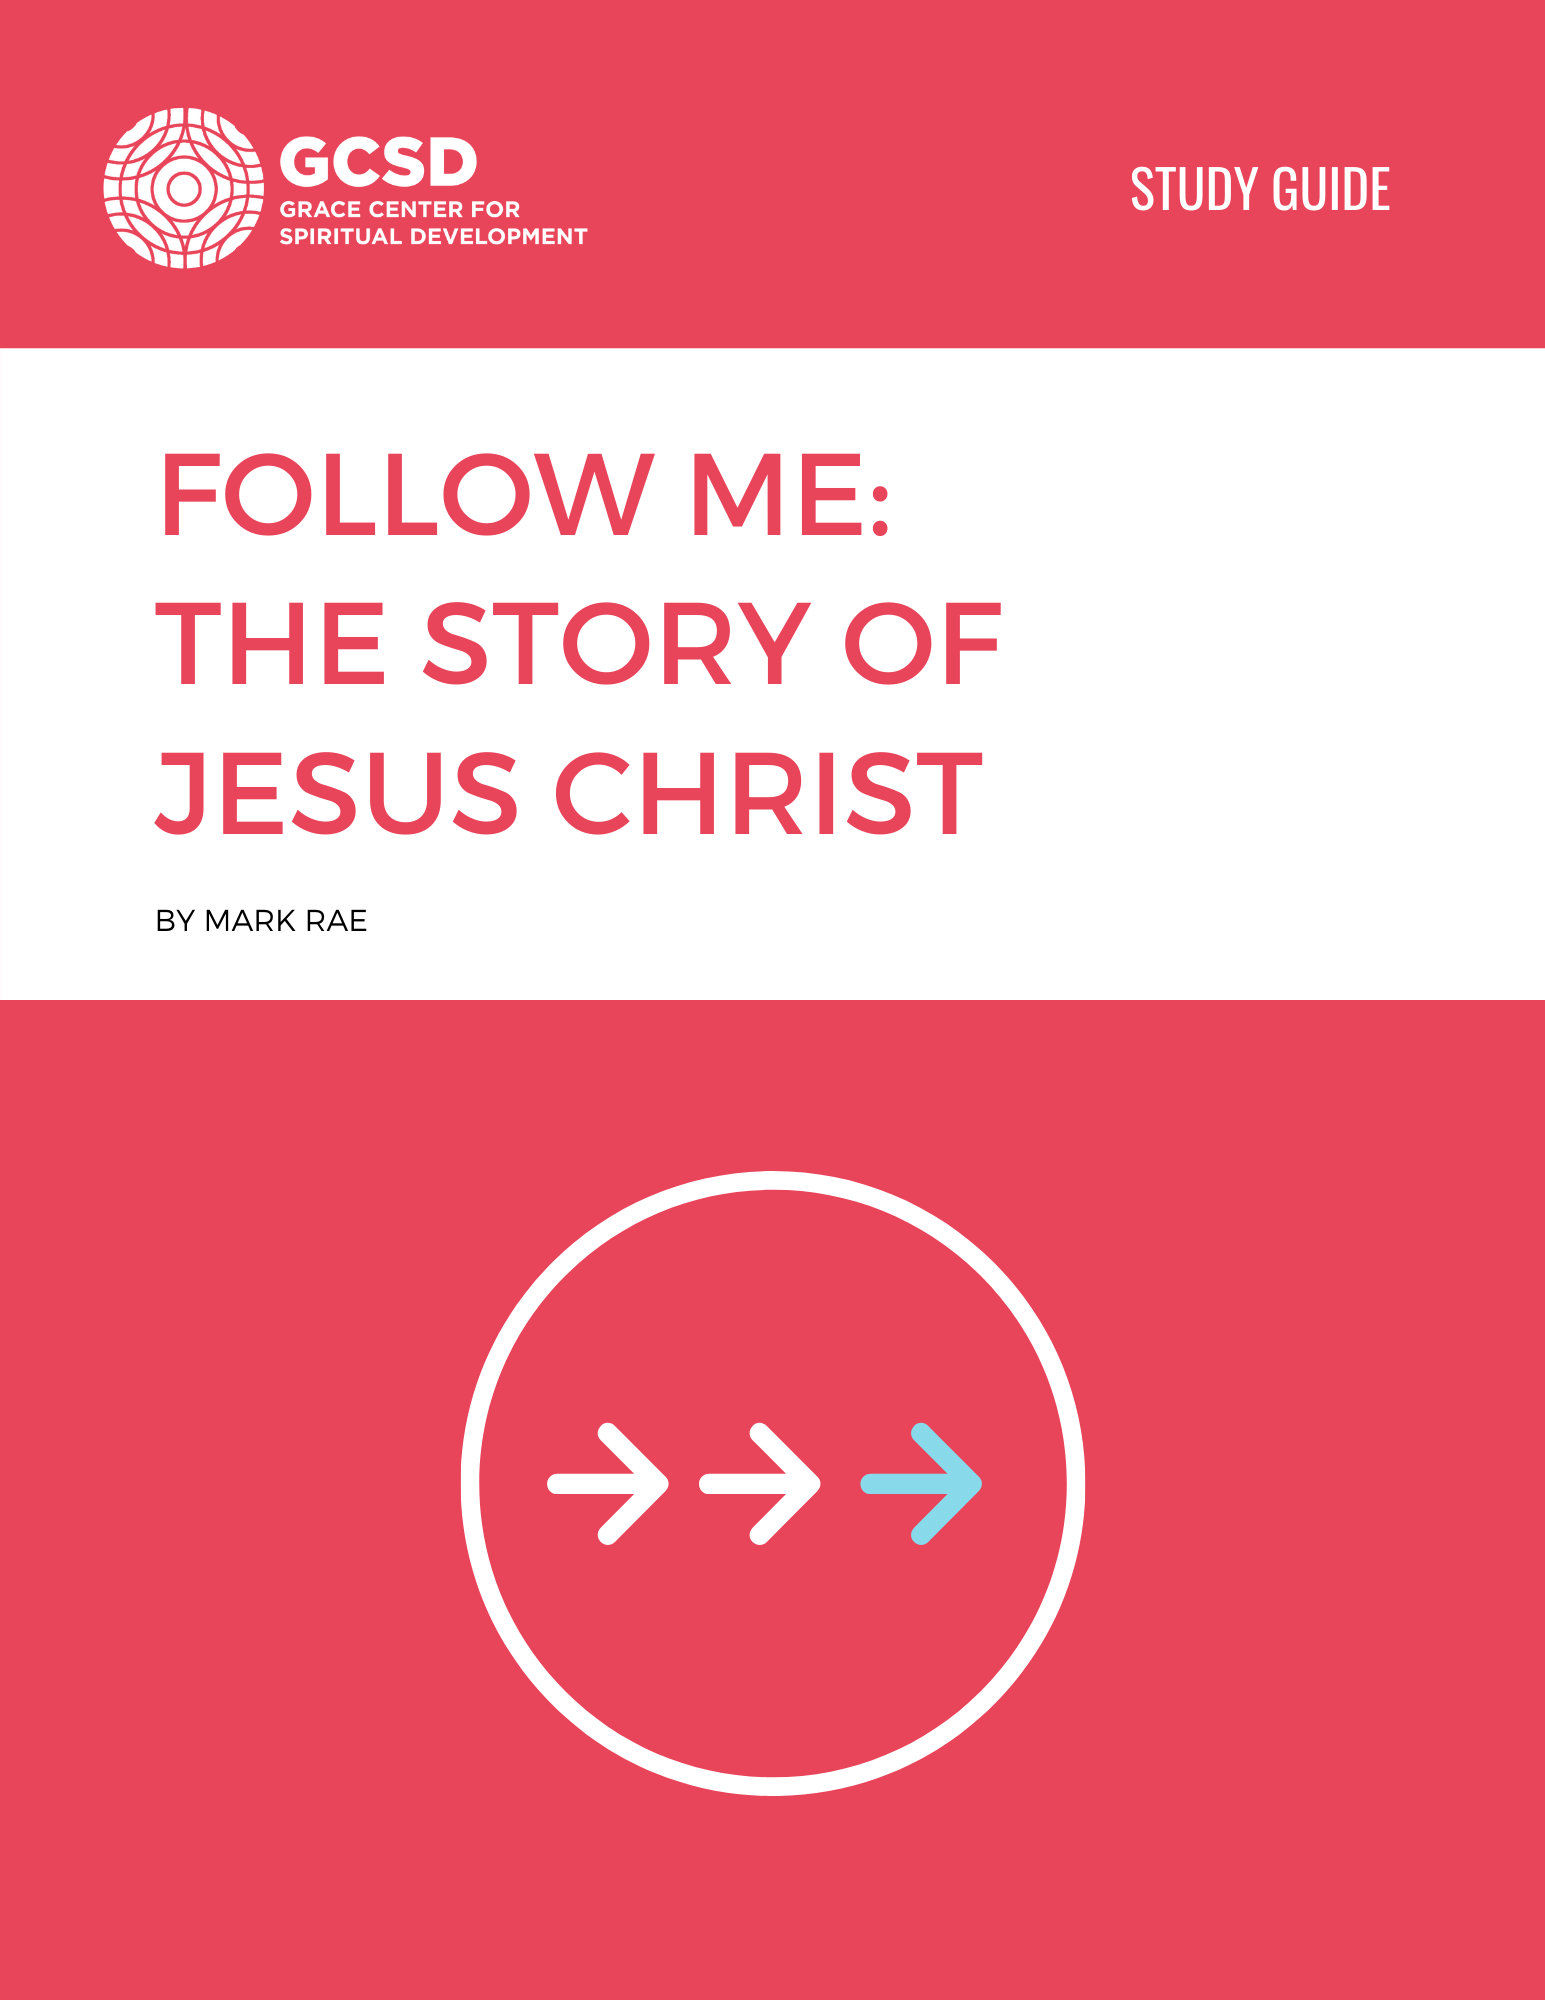 Follow Me: The Story of Jesus Christ